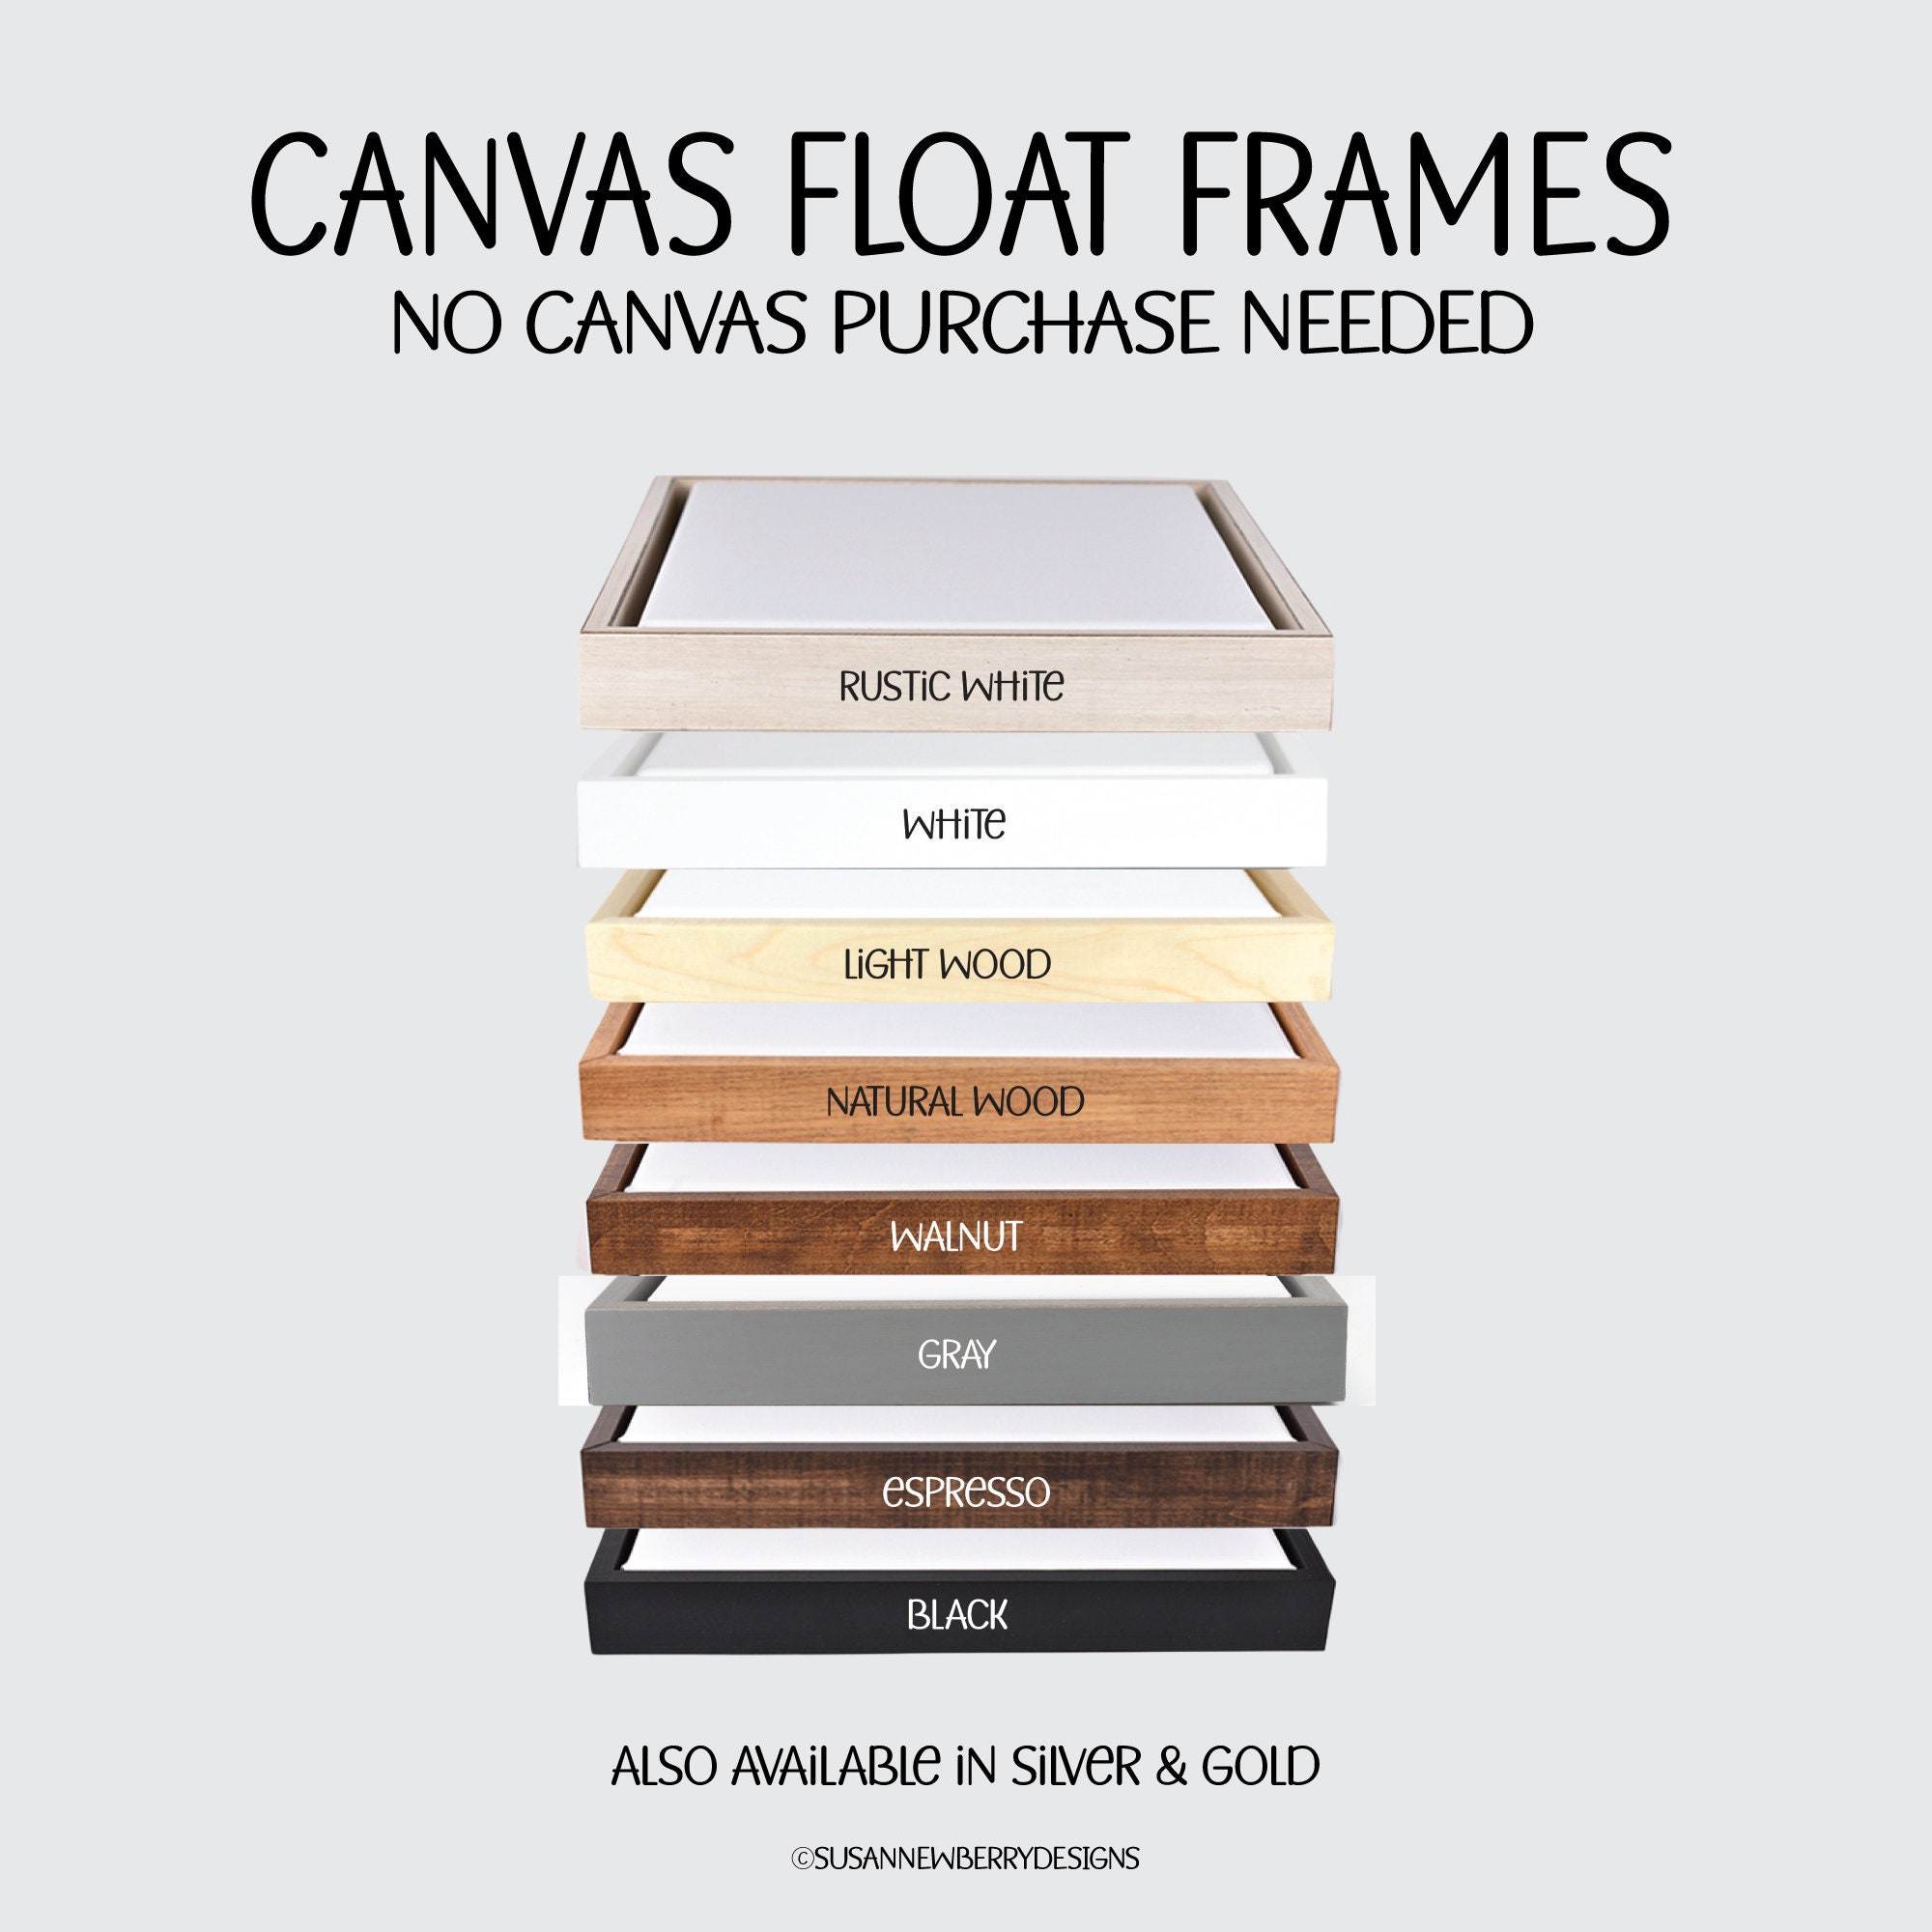  Brushed Silver Floater Frame for 1.5 Inch Deep Canvas, 16x20:  Posters & Prints